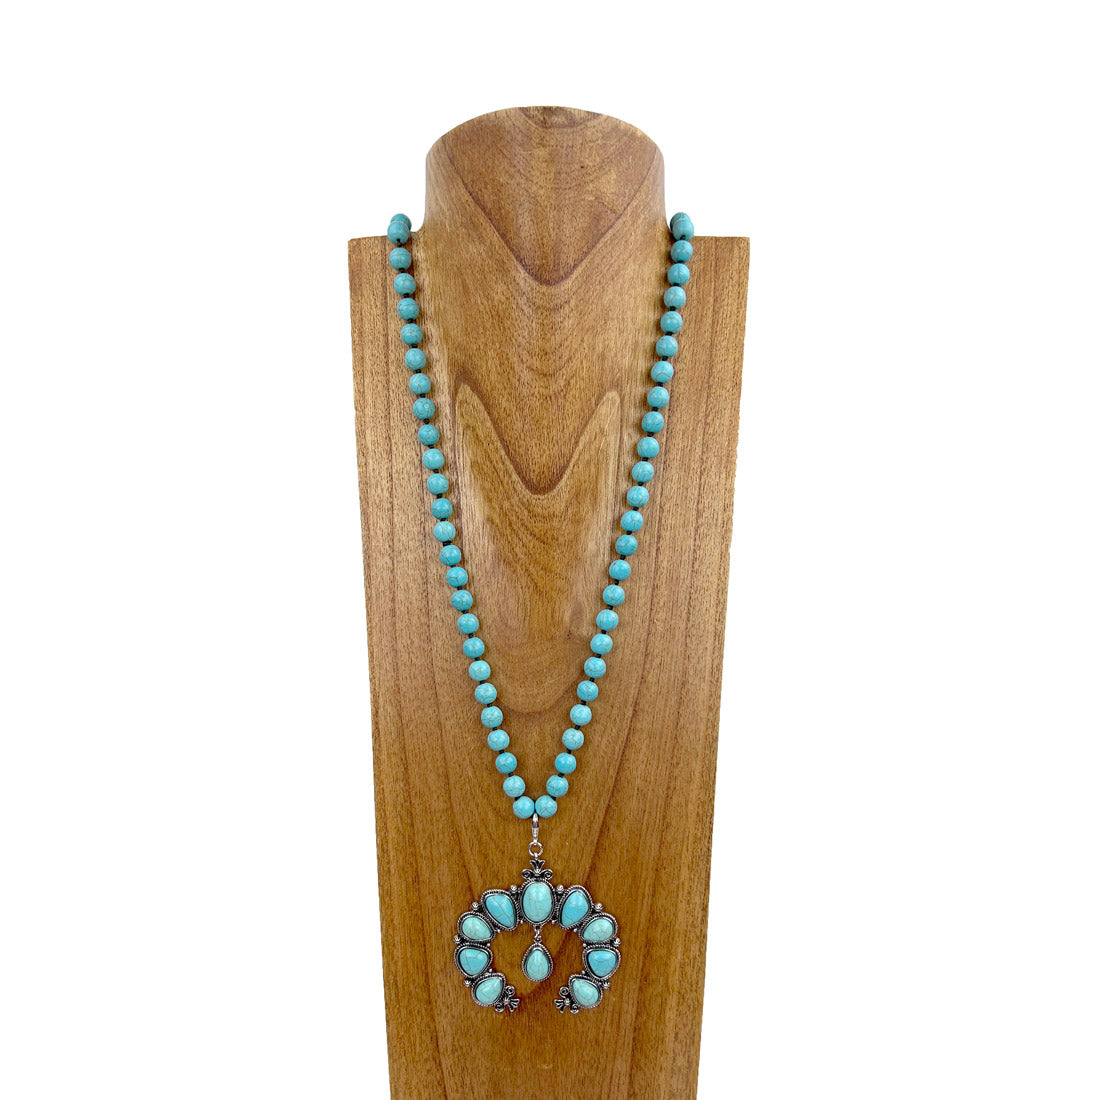 NKZ230924-08     34 inches 10mm blue turquoise stone beads with big blue turquoise stone squash blossom Necklace